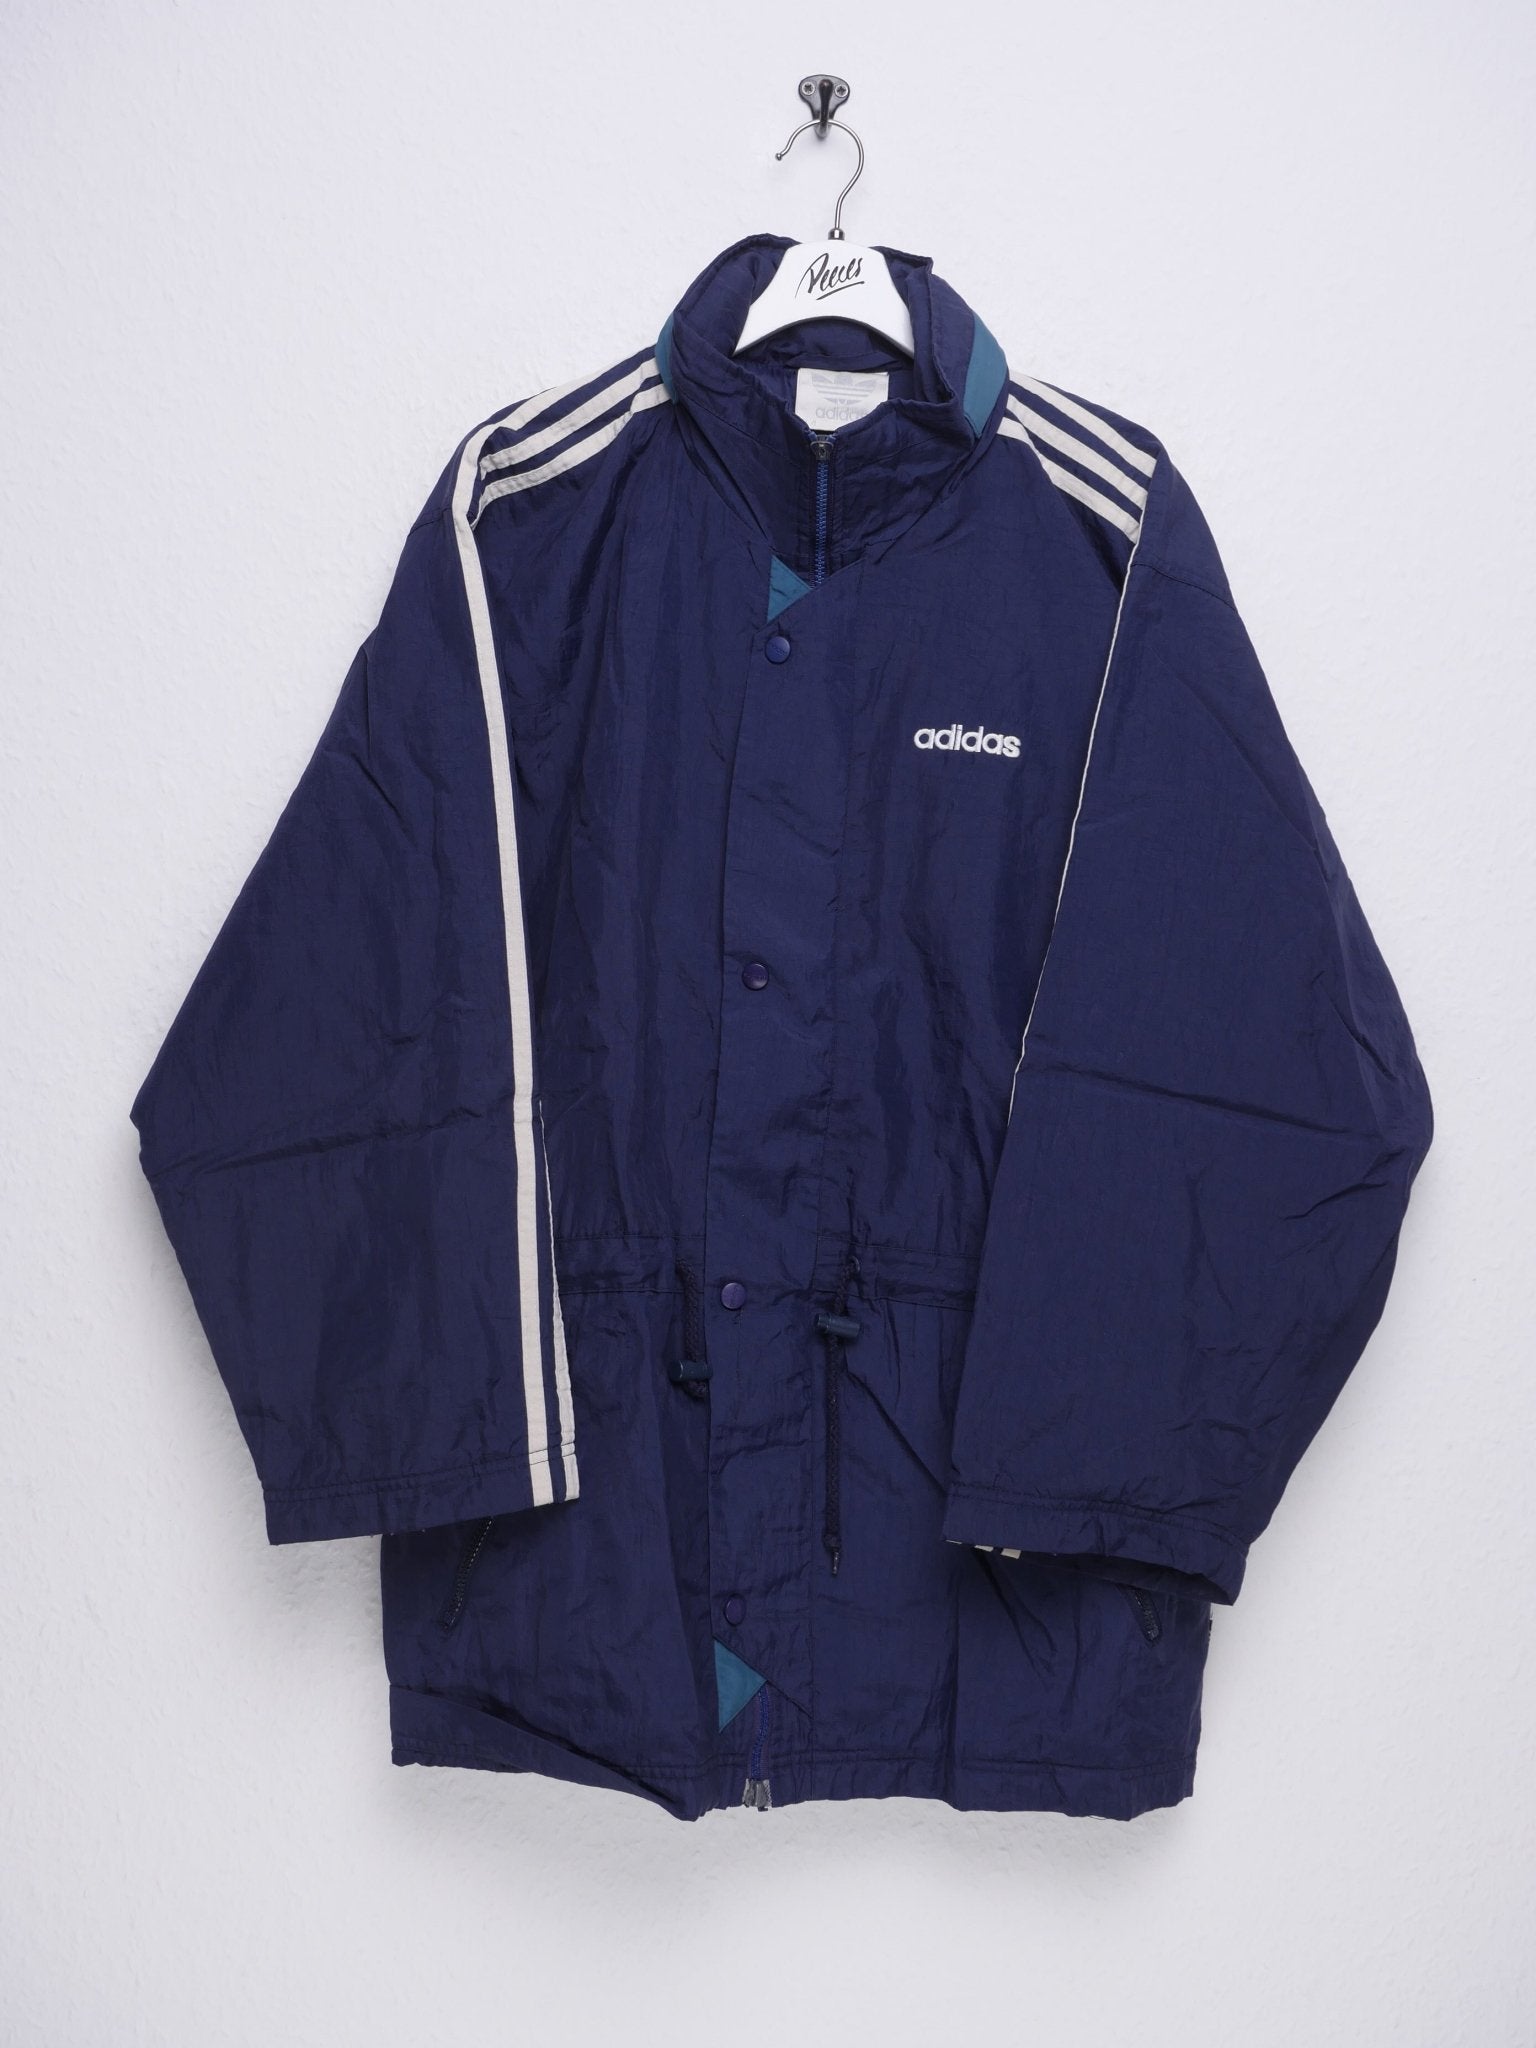 Adidas embroidered Spellout Vintage Heavy Jacke - Peeces